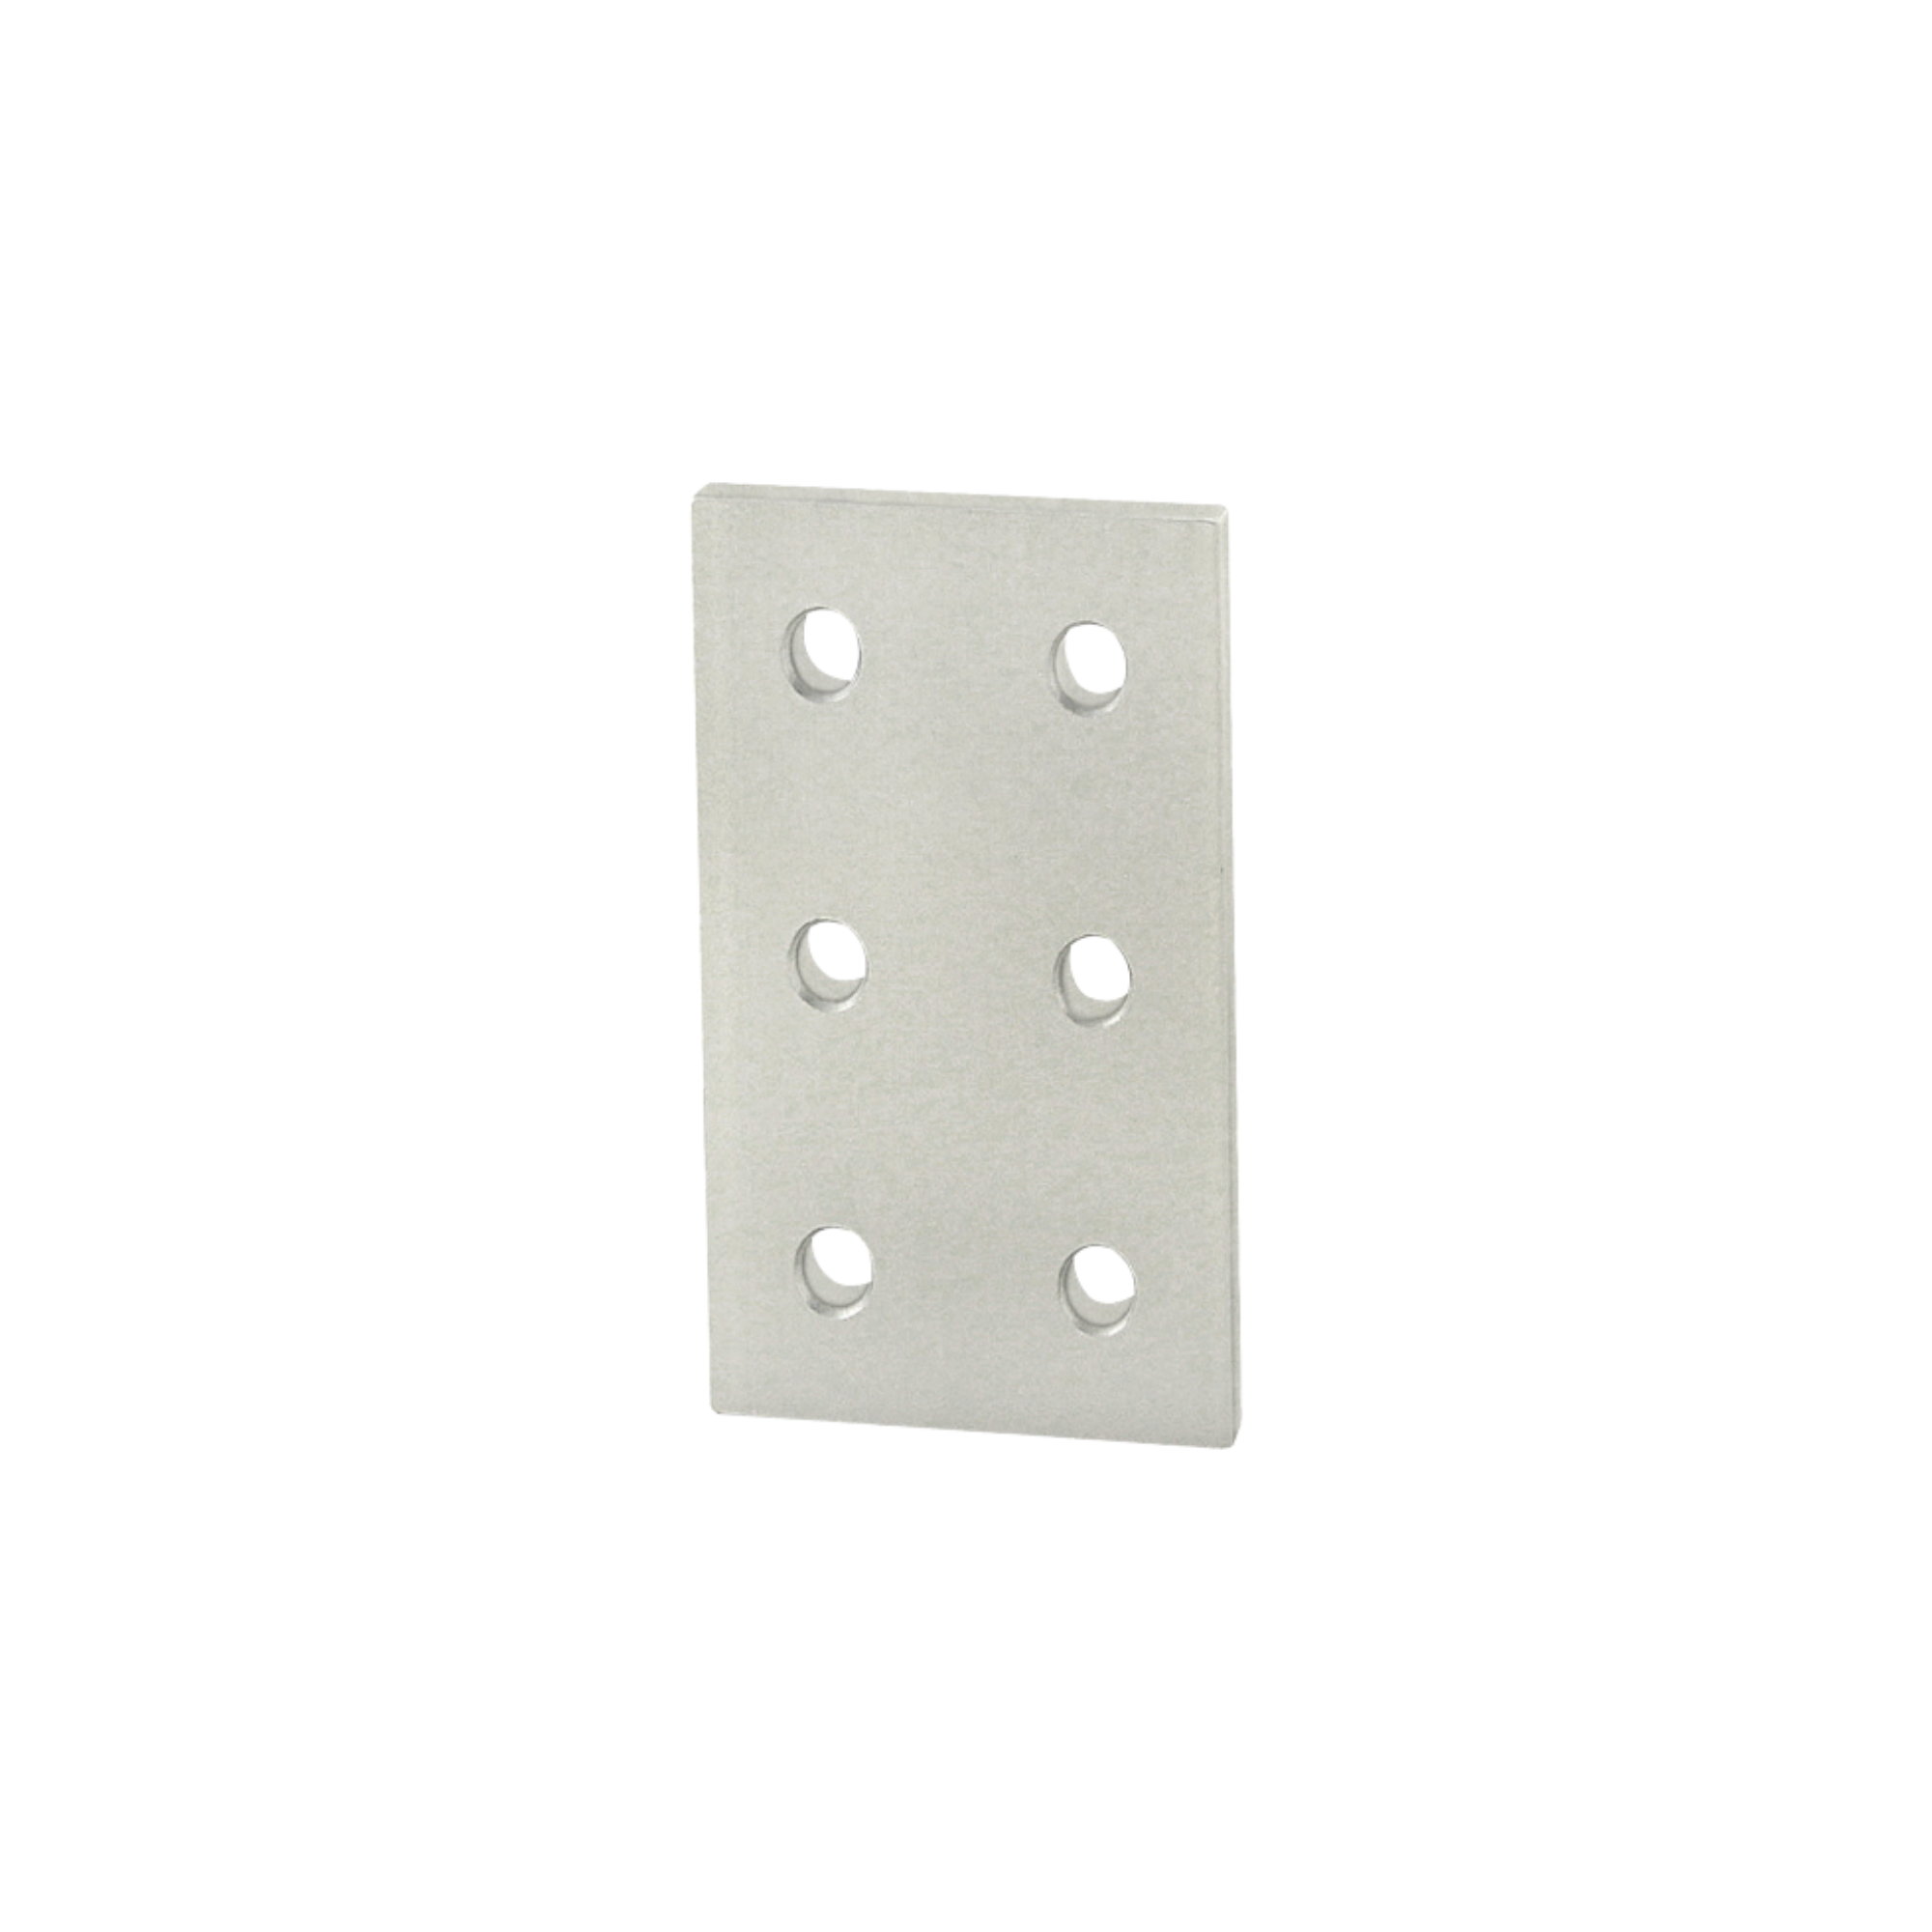 upright rectangular flat joining plate with six mounting holes